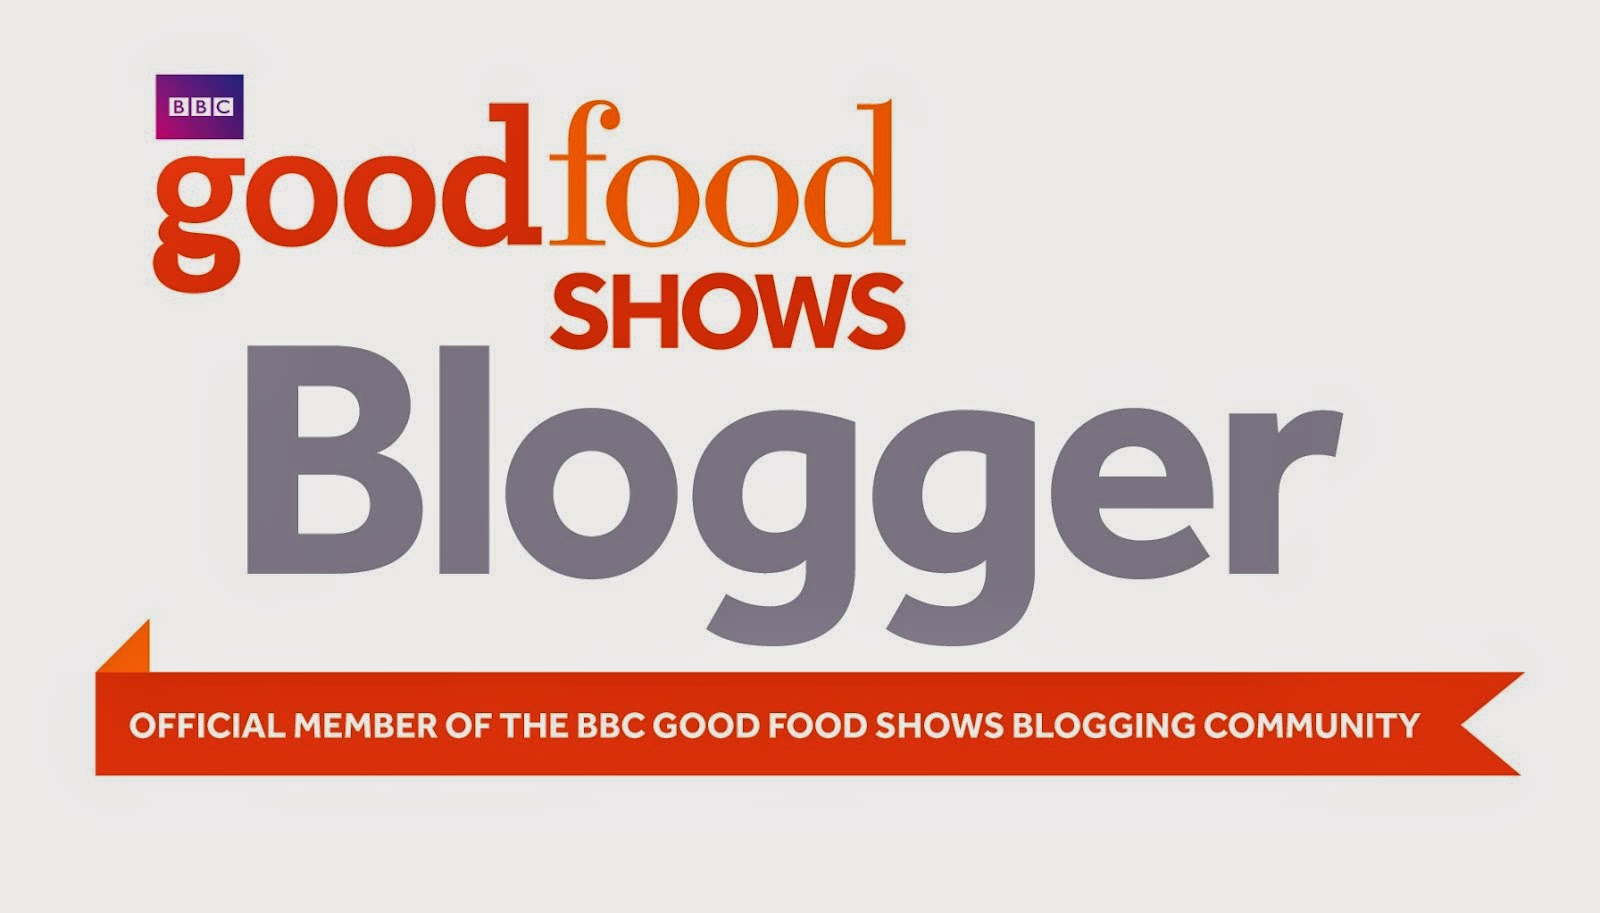 Official Member Of The BBC Good Food Shows Blogging Community